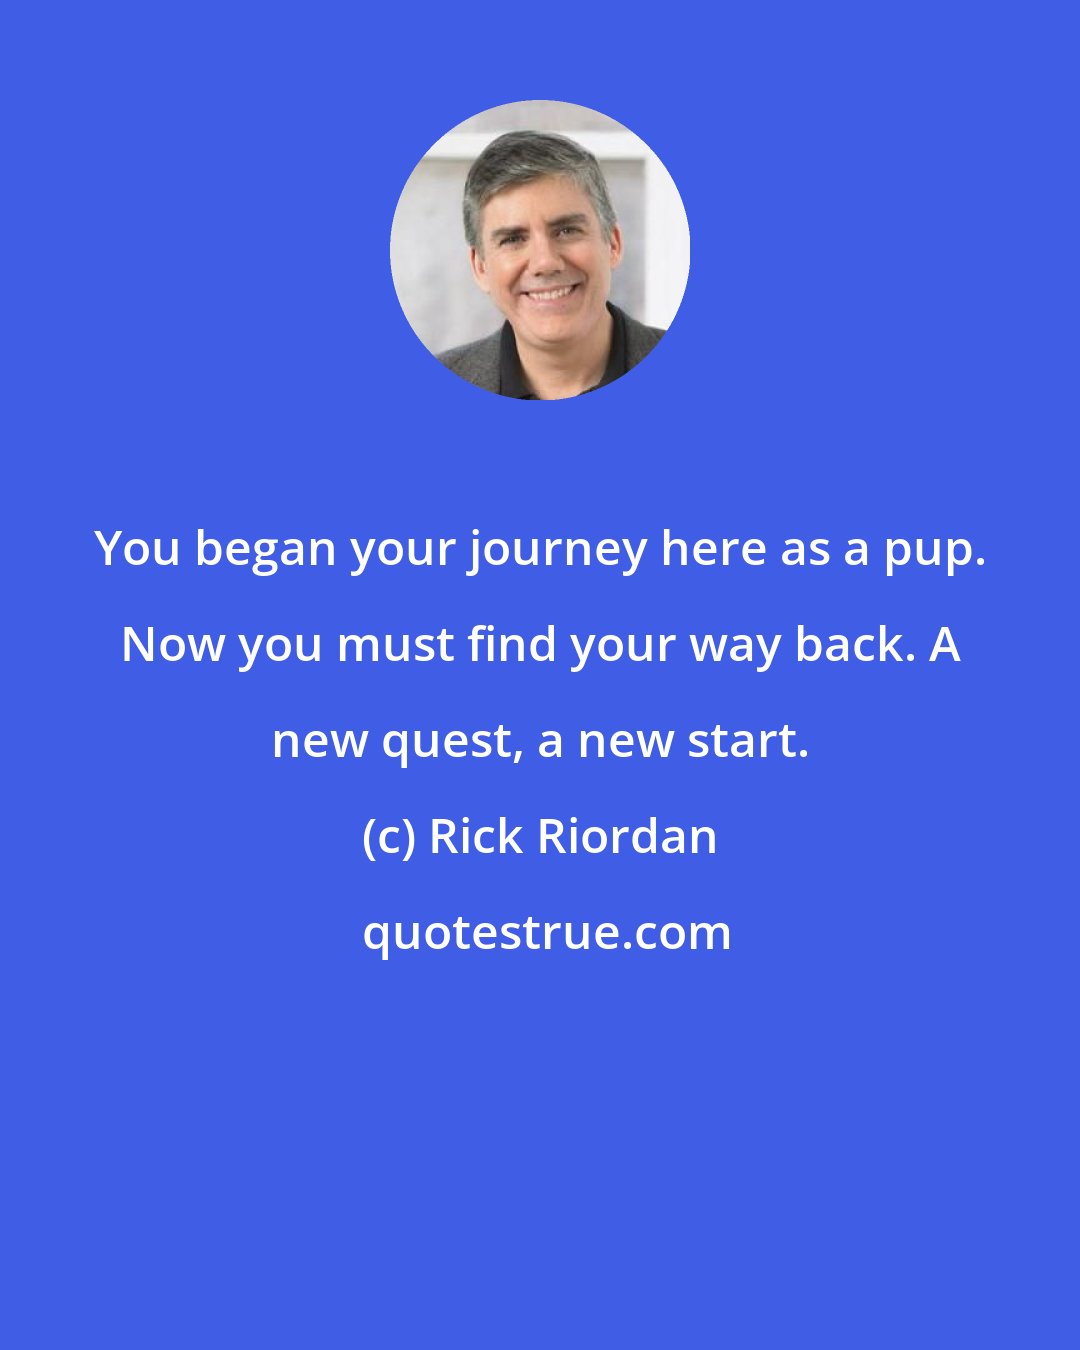 Rick Riordan: You began your journey here as a pup. Now you must find your way back. A new quest, a new start.